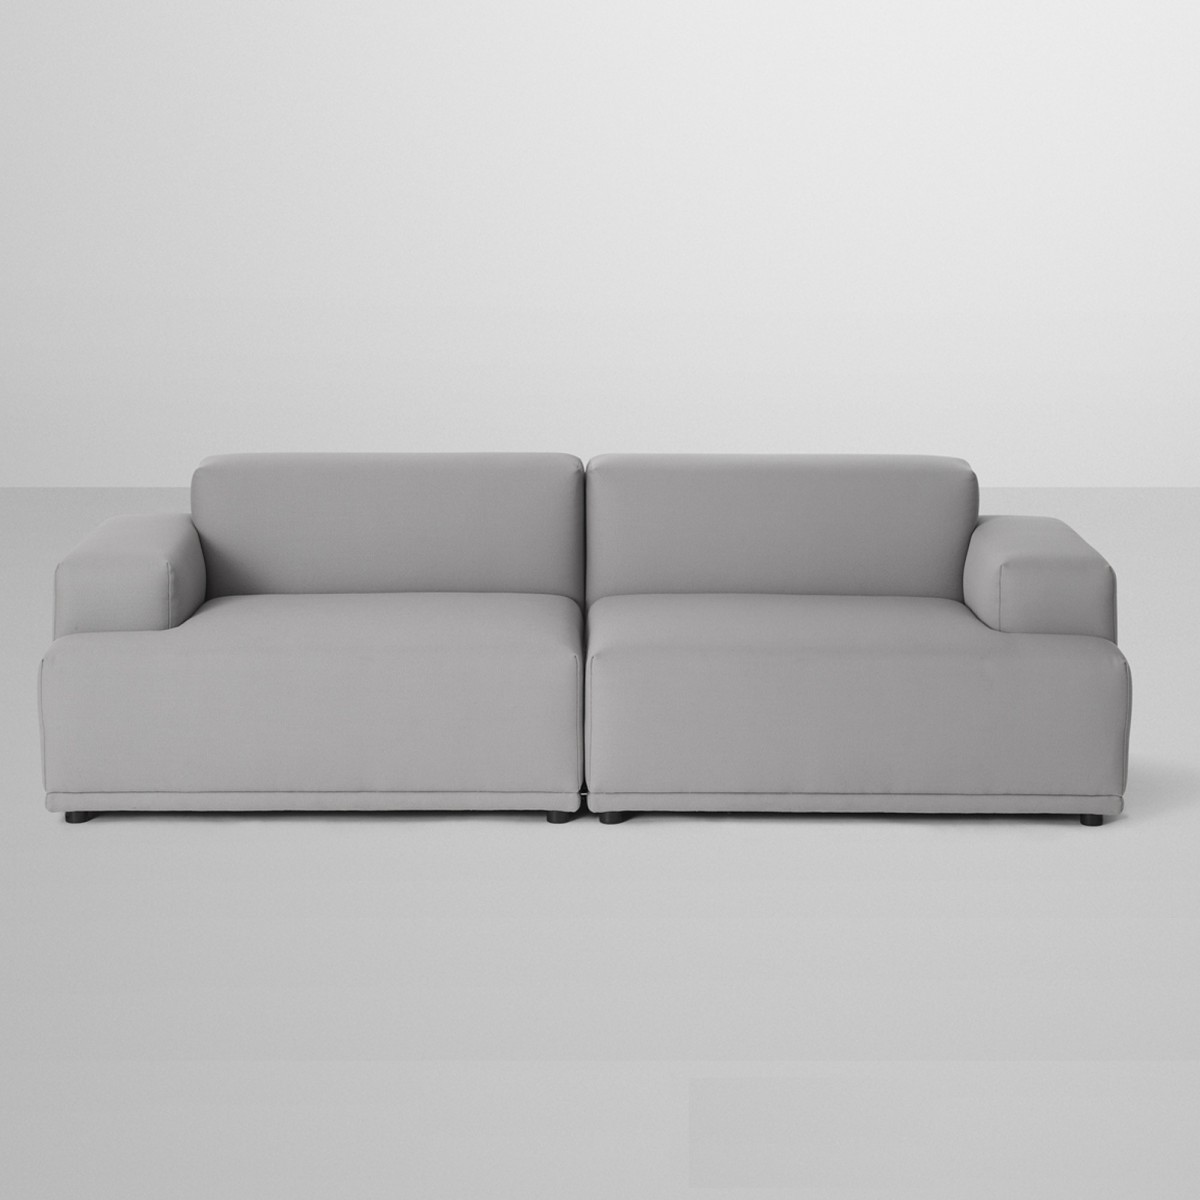 The Modular 2 Seaters Sofa Connect By, Connect Modular Sofa System Muuto